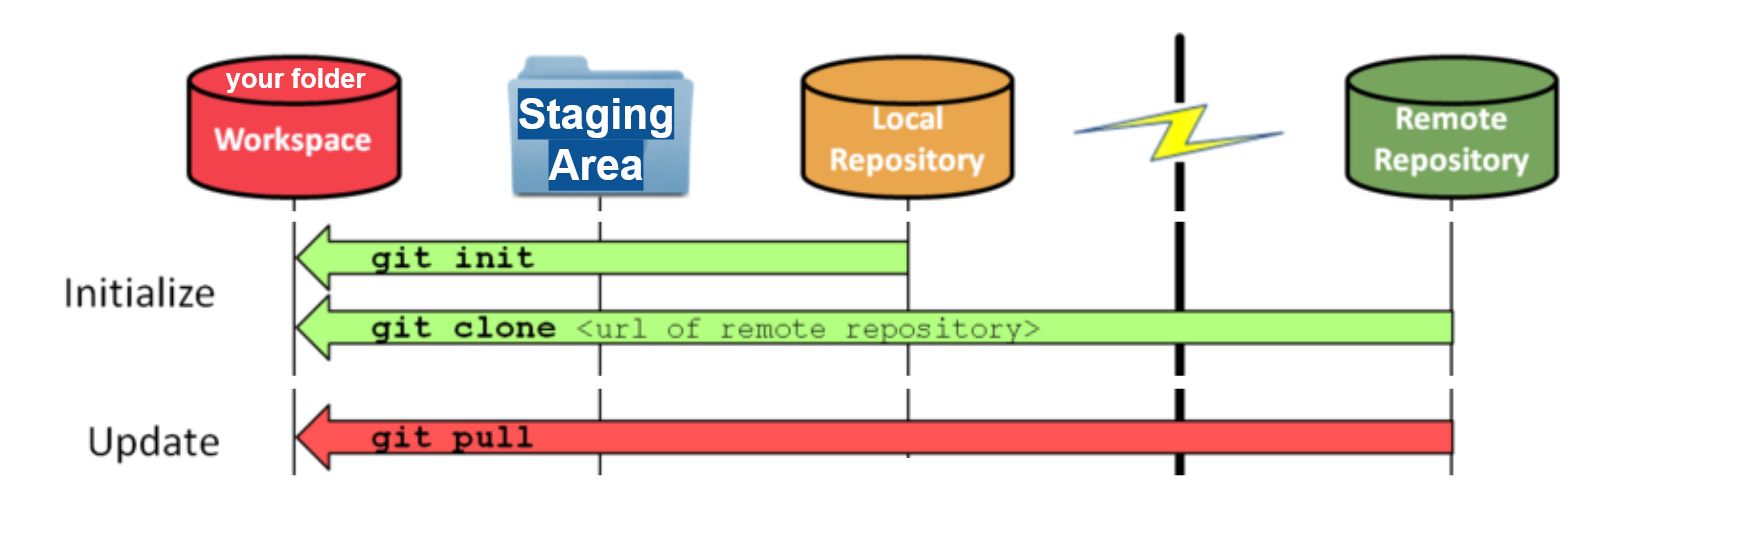 Use git clone to obtain a development copy of a remote repository. Like git init, cloning is generally a one-time operation. Use git pull to update the local repository to match the content in the remote repository.